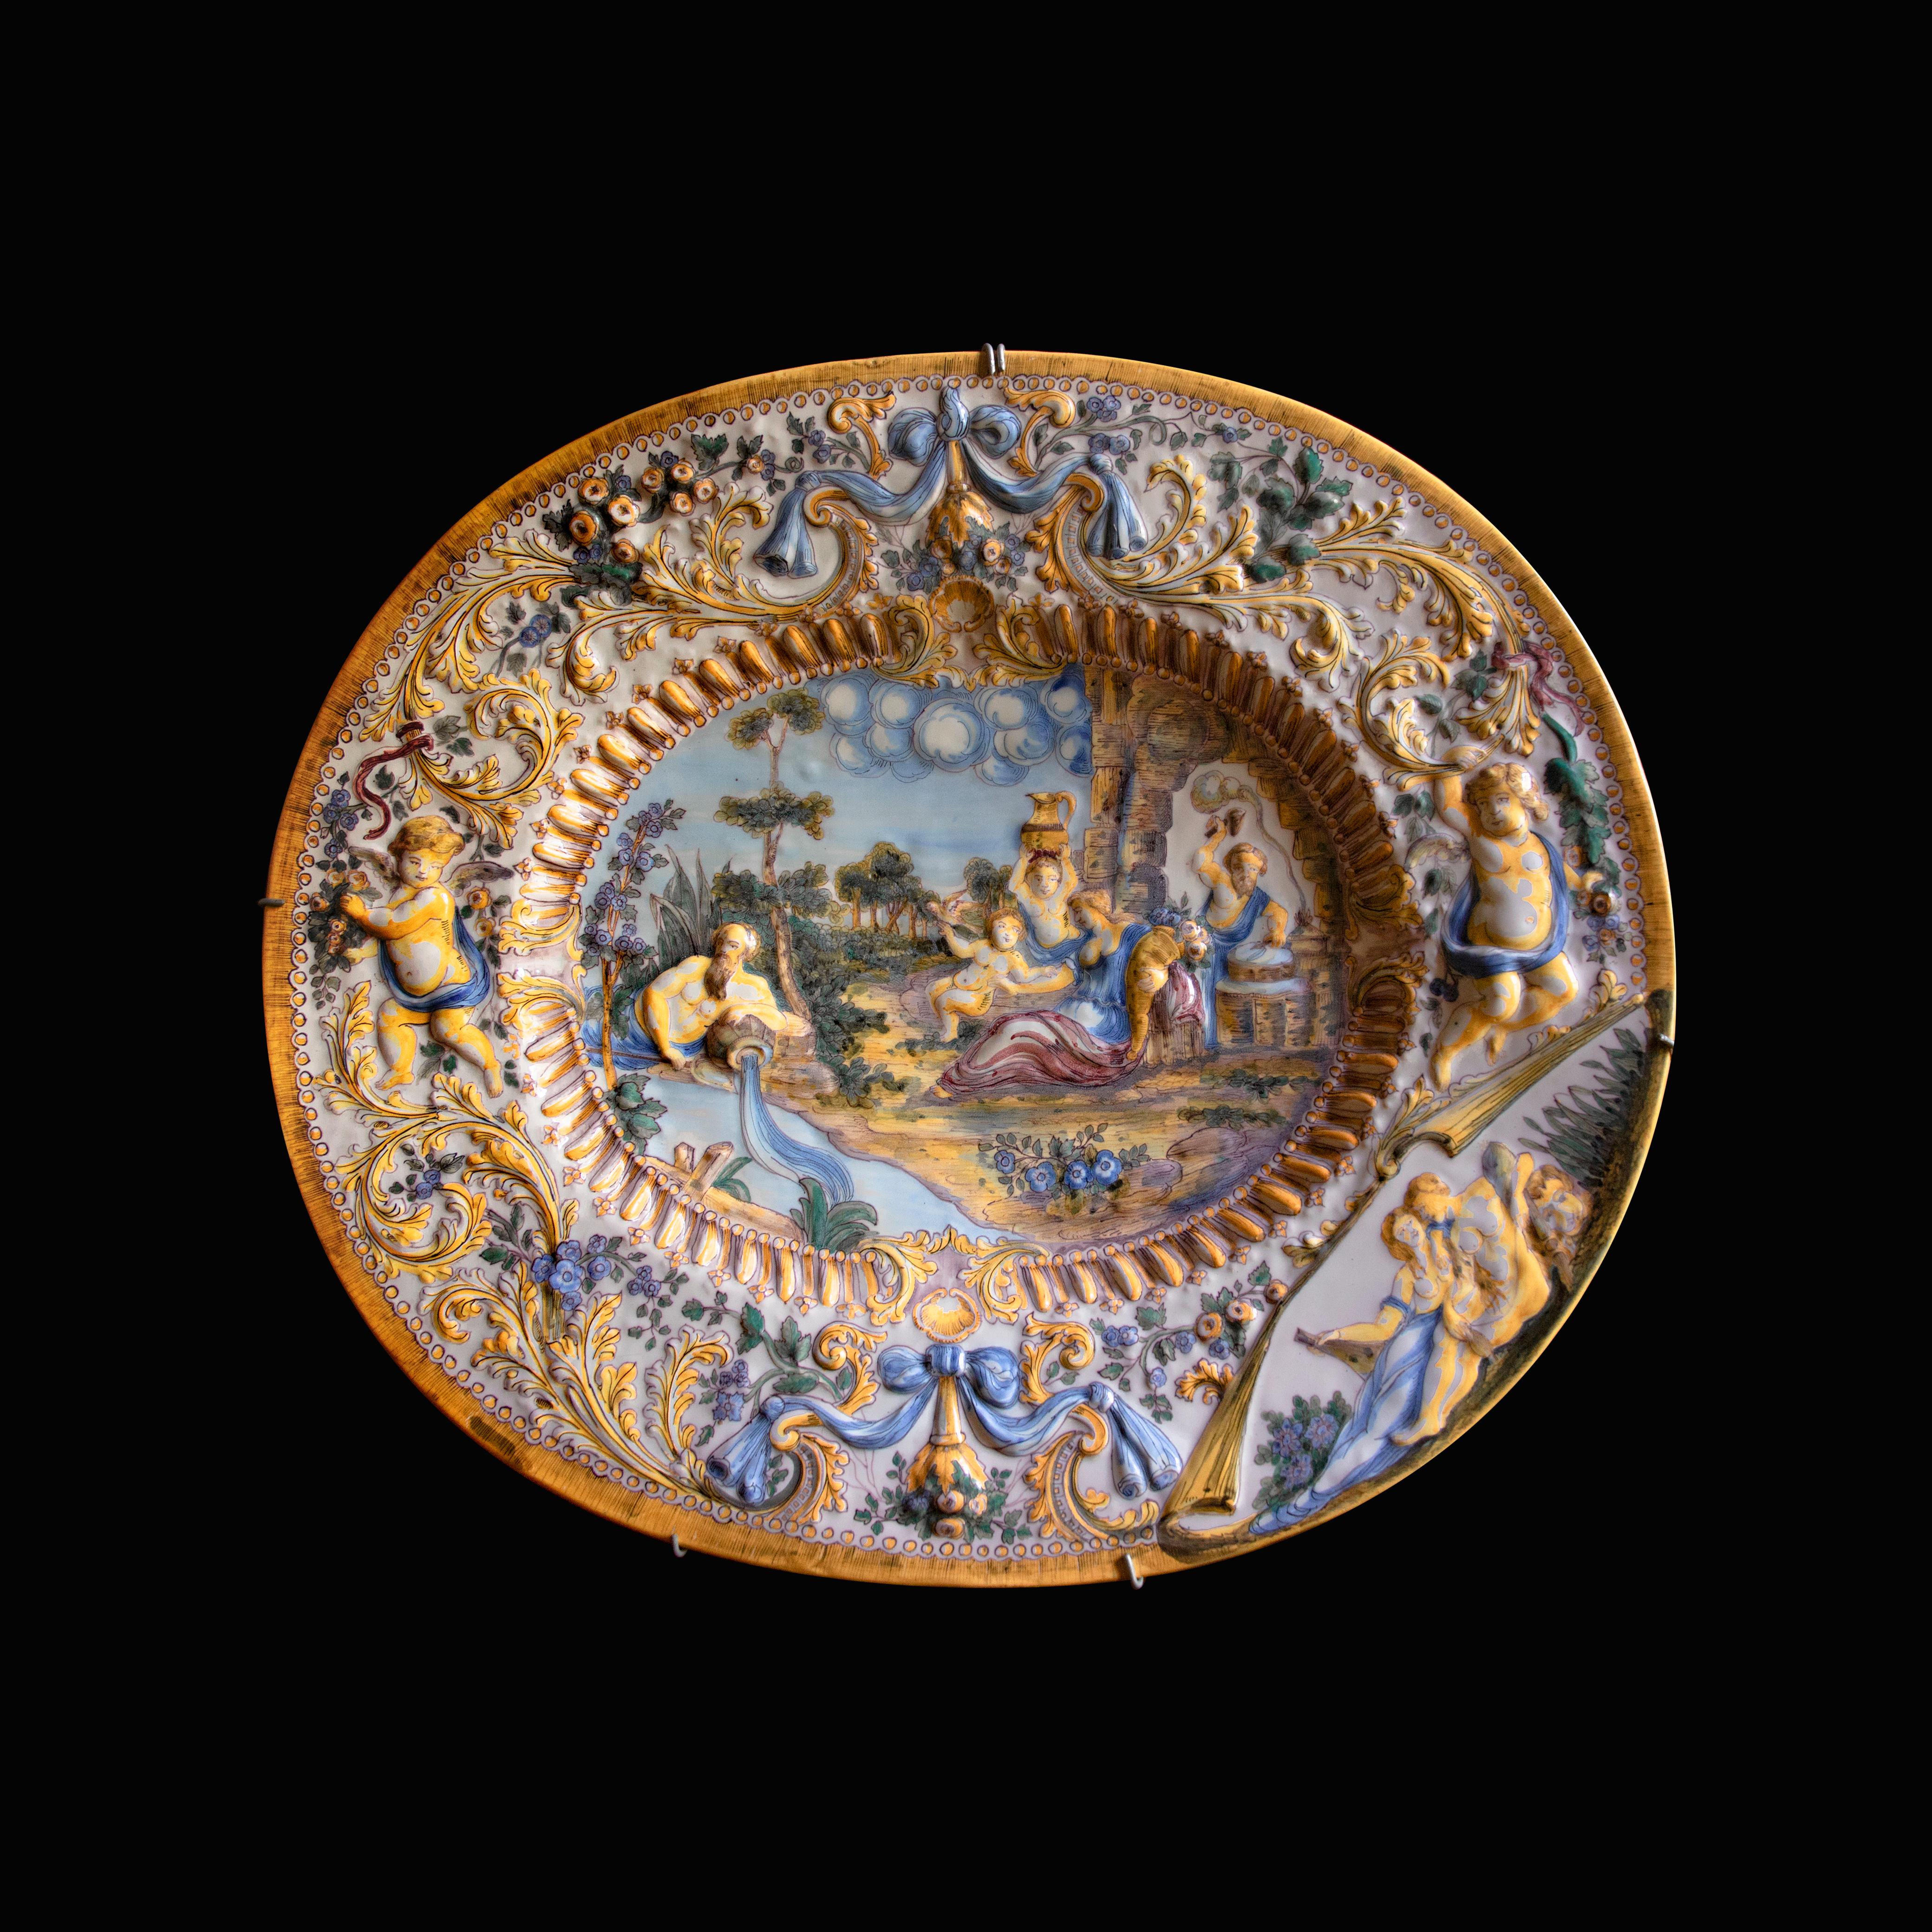 Oval Italian ceramic dish adorned with baroque figures and decoration in relief - Rococo Art by Unknown